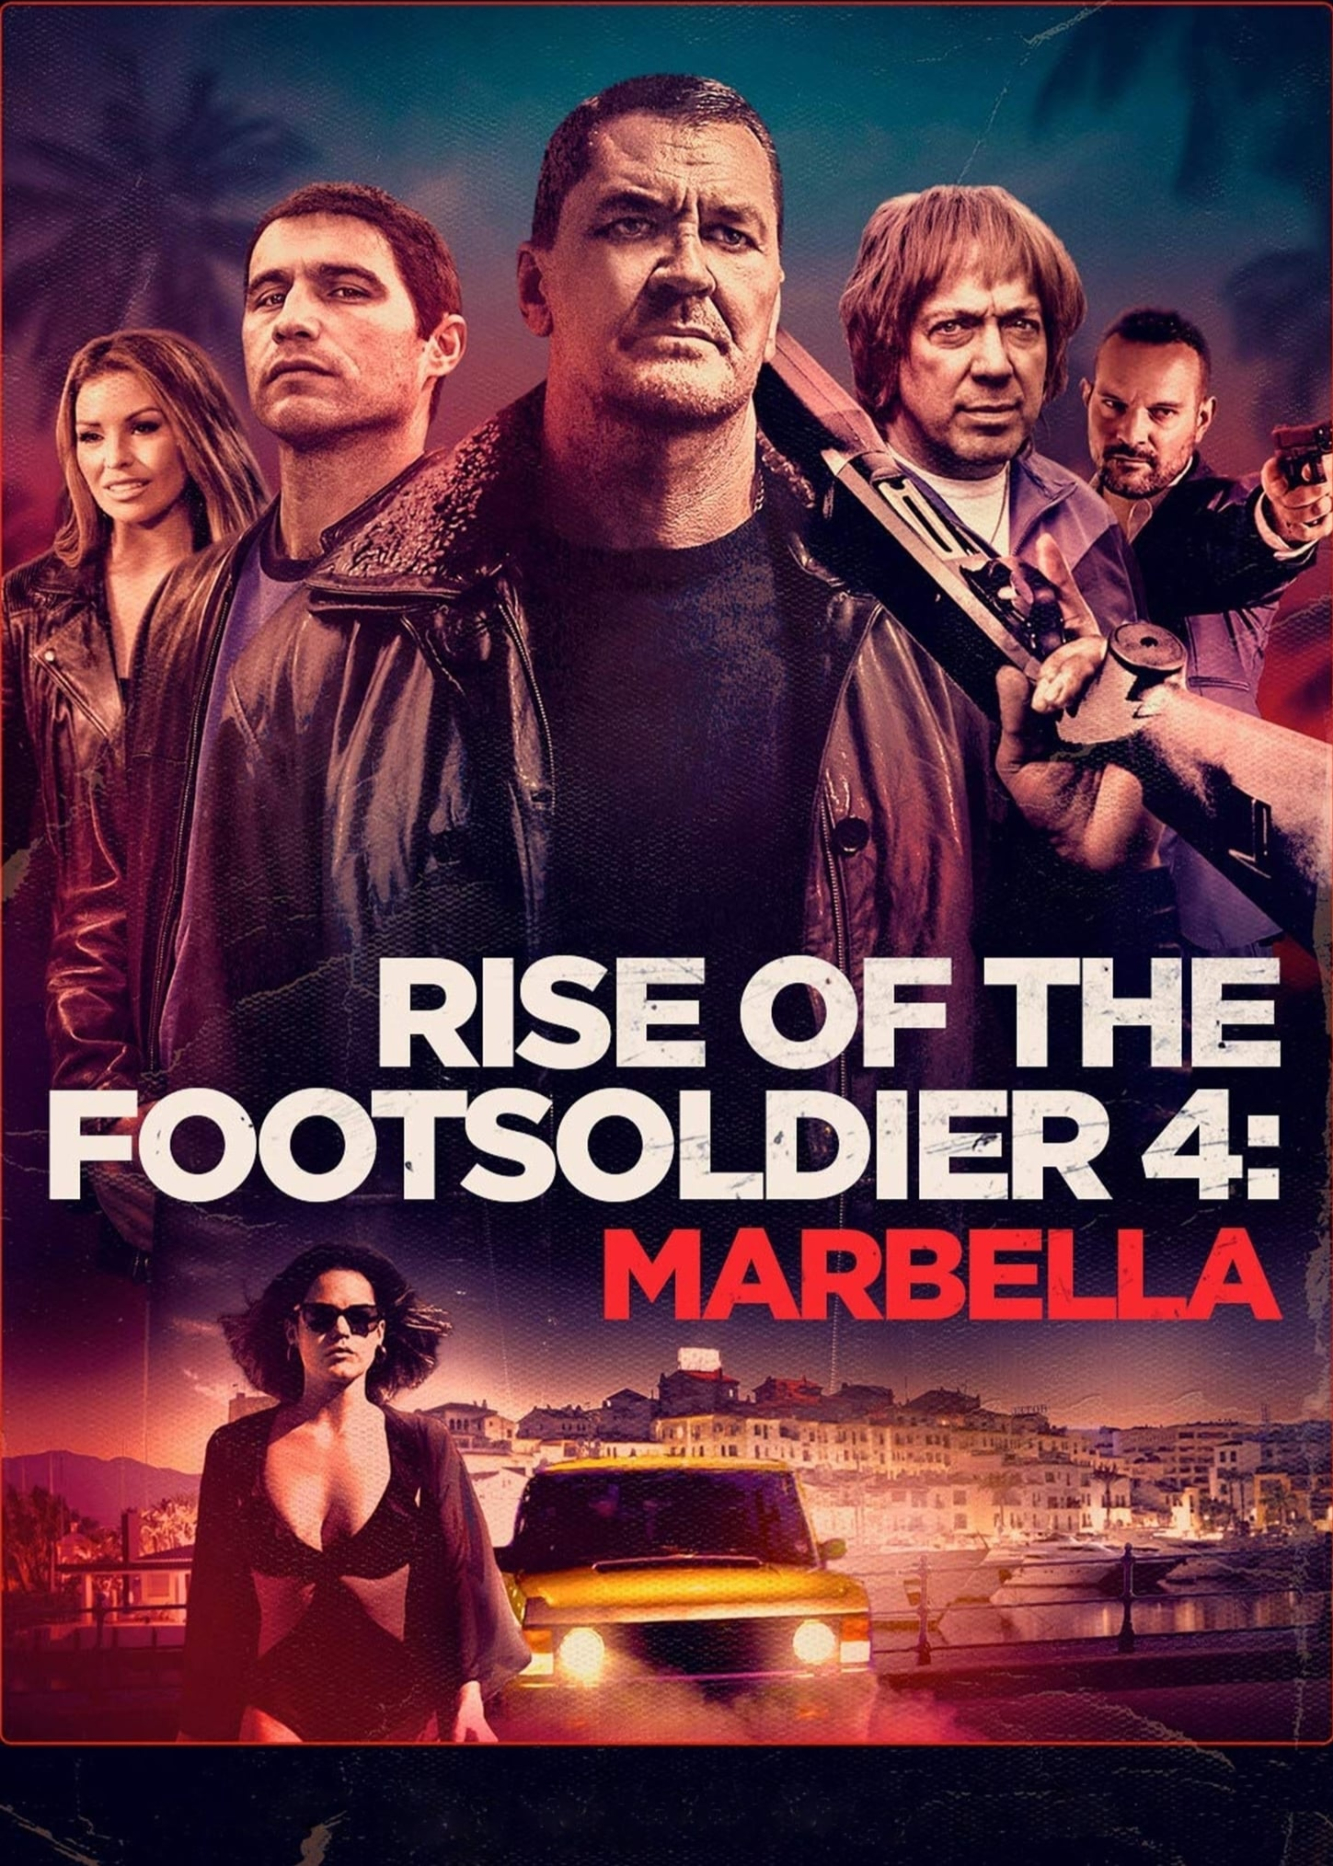 Xem Phim Rise of the Footsoldier 4: Marbella (Rise of the Footsoldier 4: Marbella)